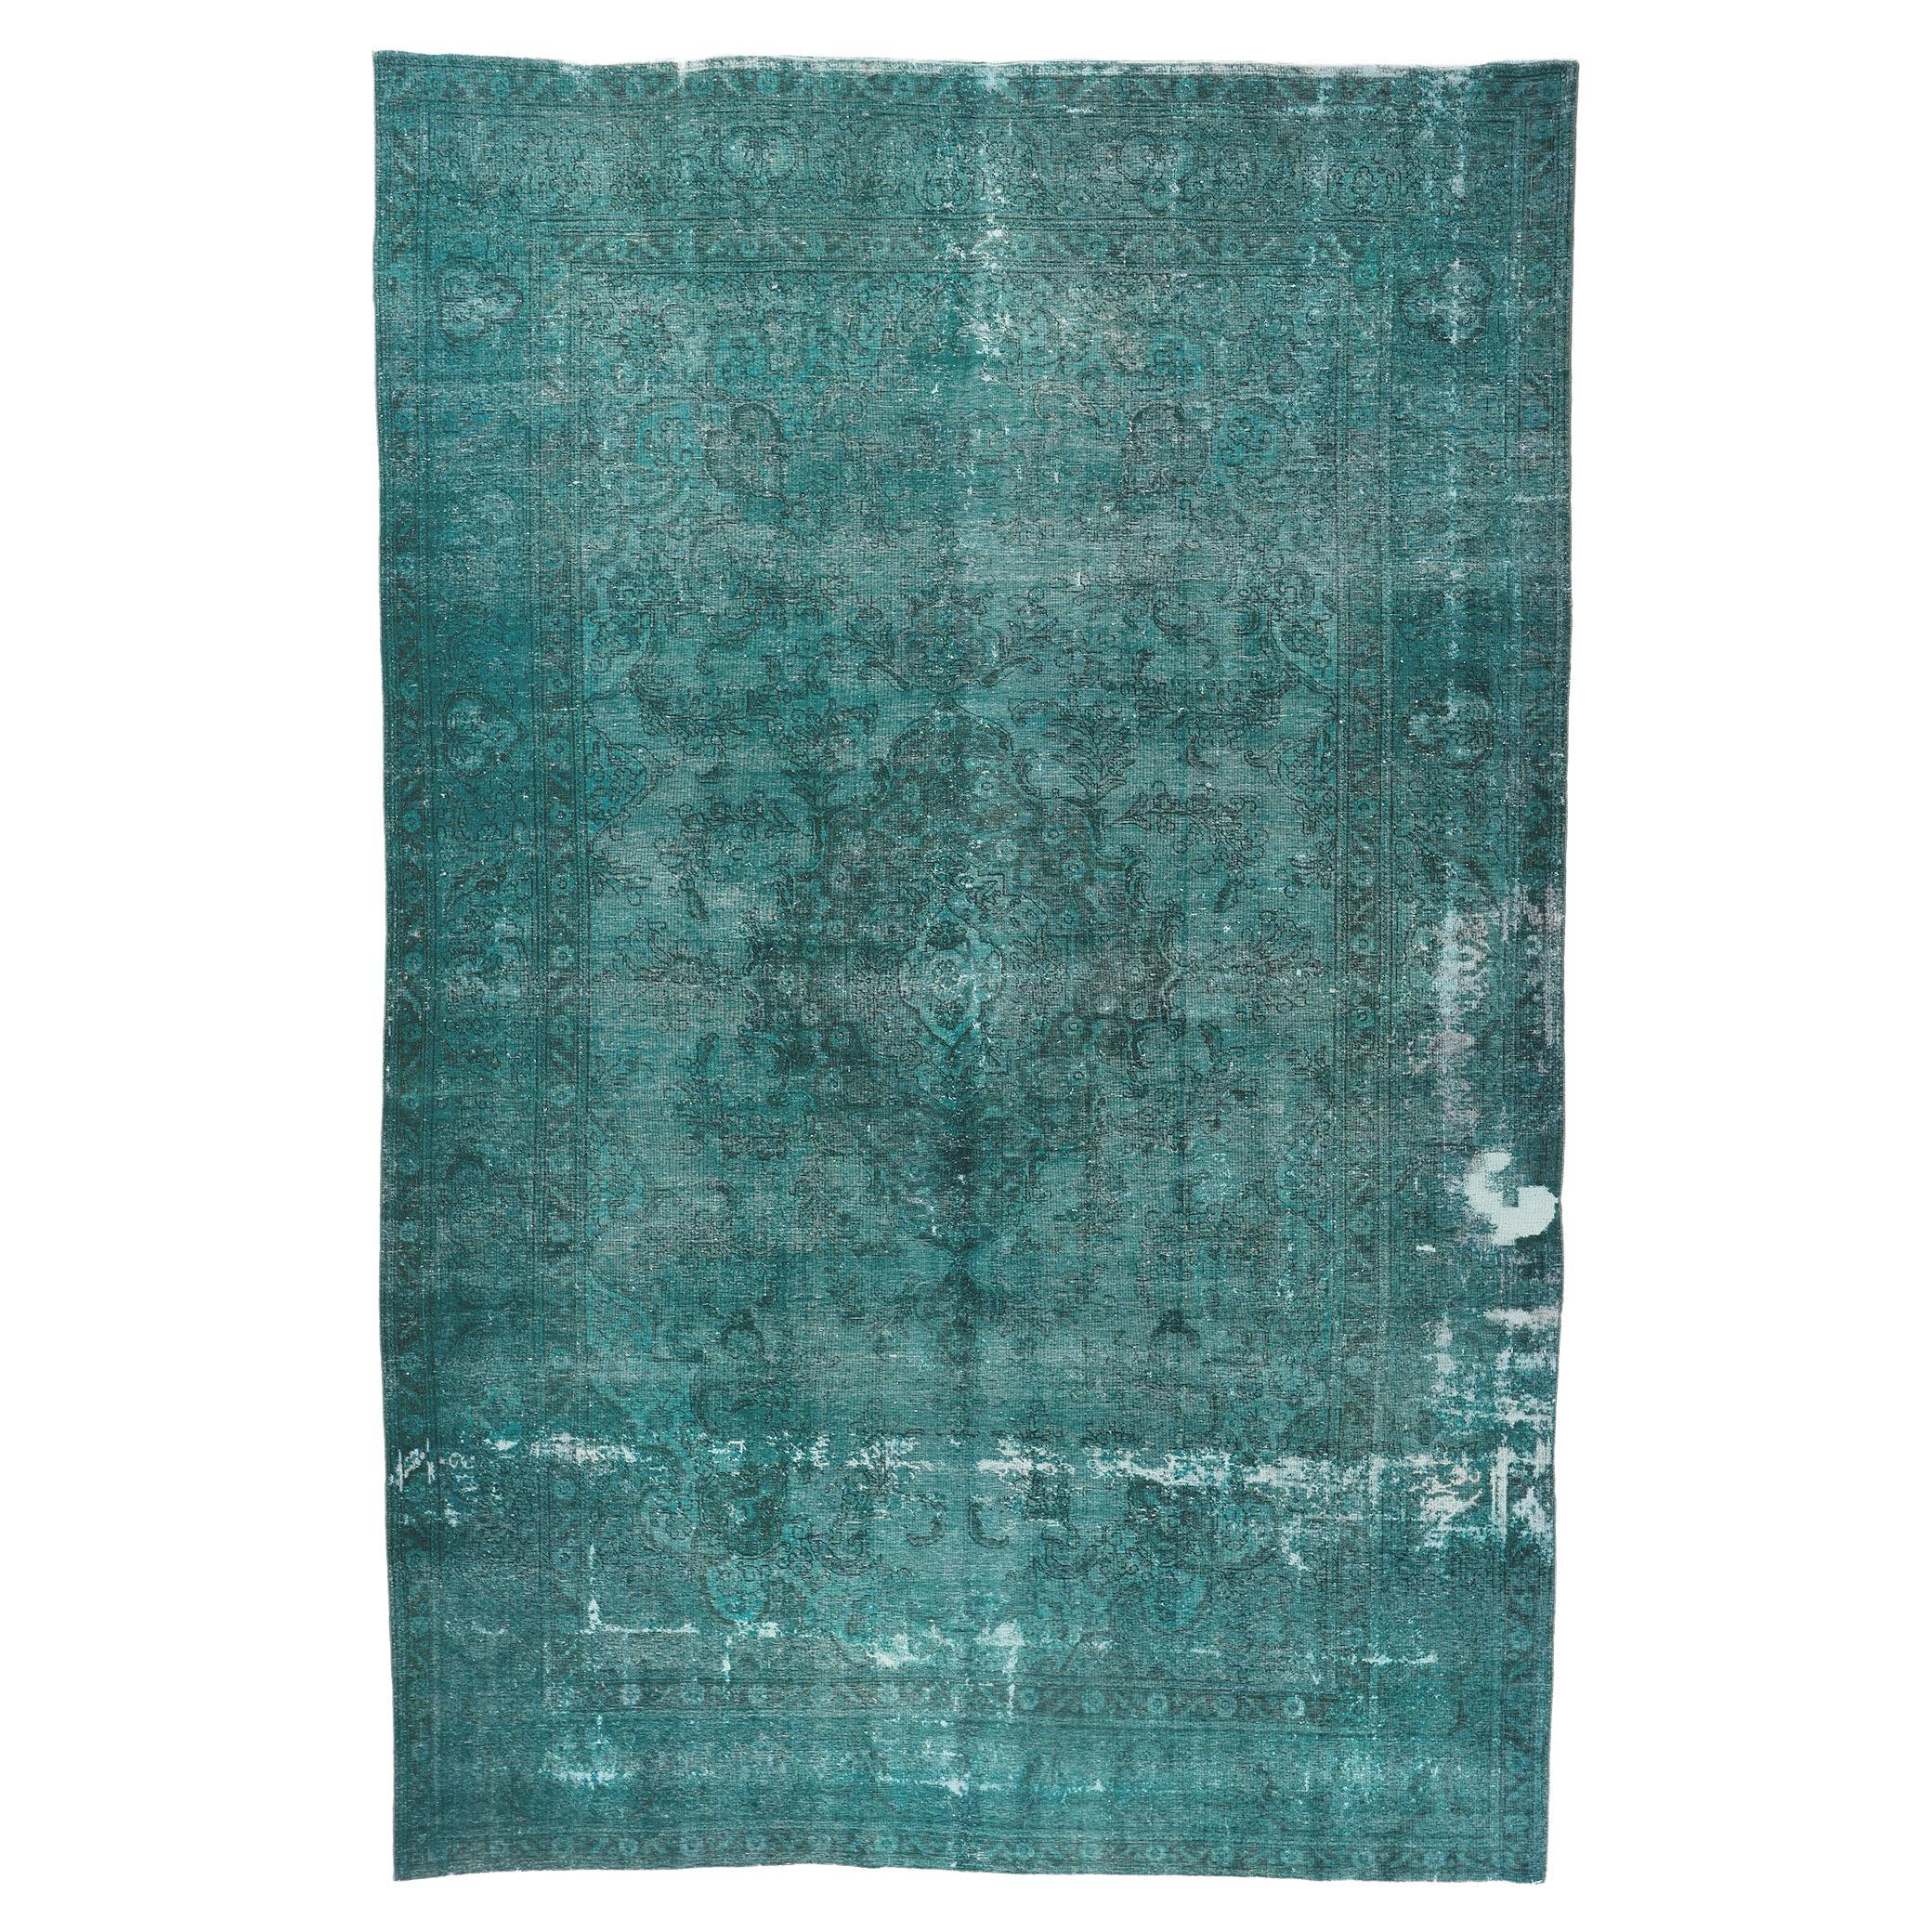 Oversized Vintage Persian Teal Overdyed Rug